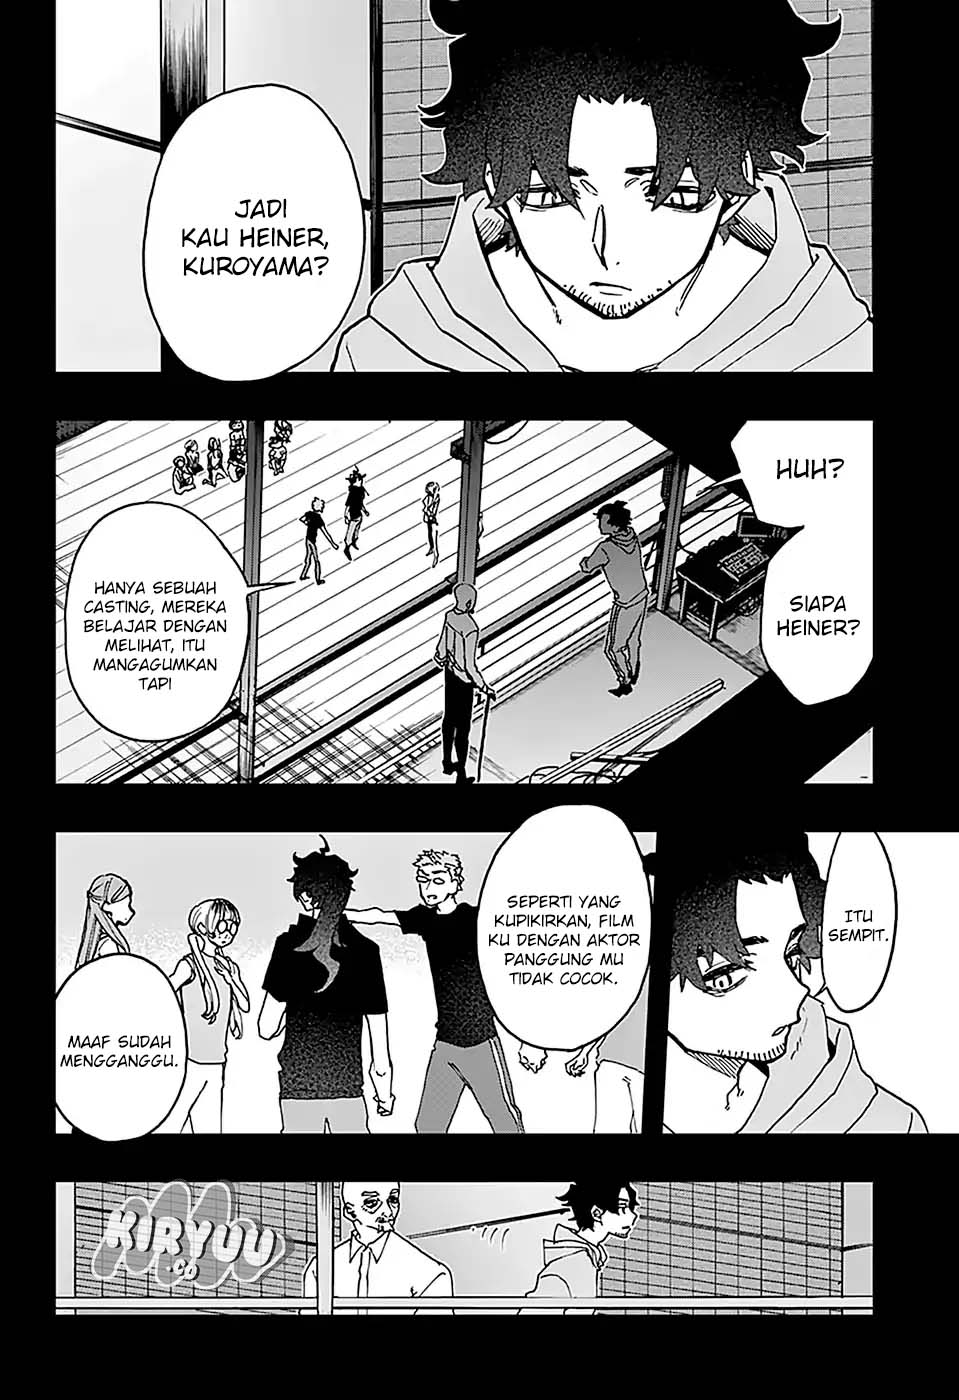 ACT-AGE Chapter 45